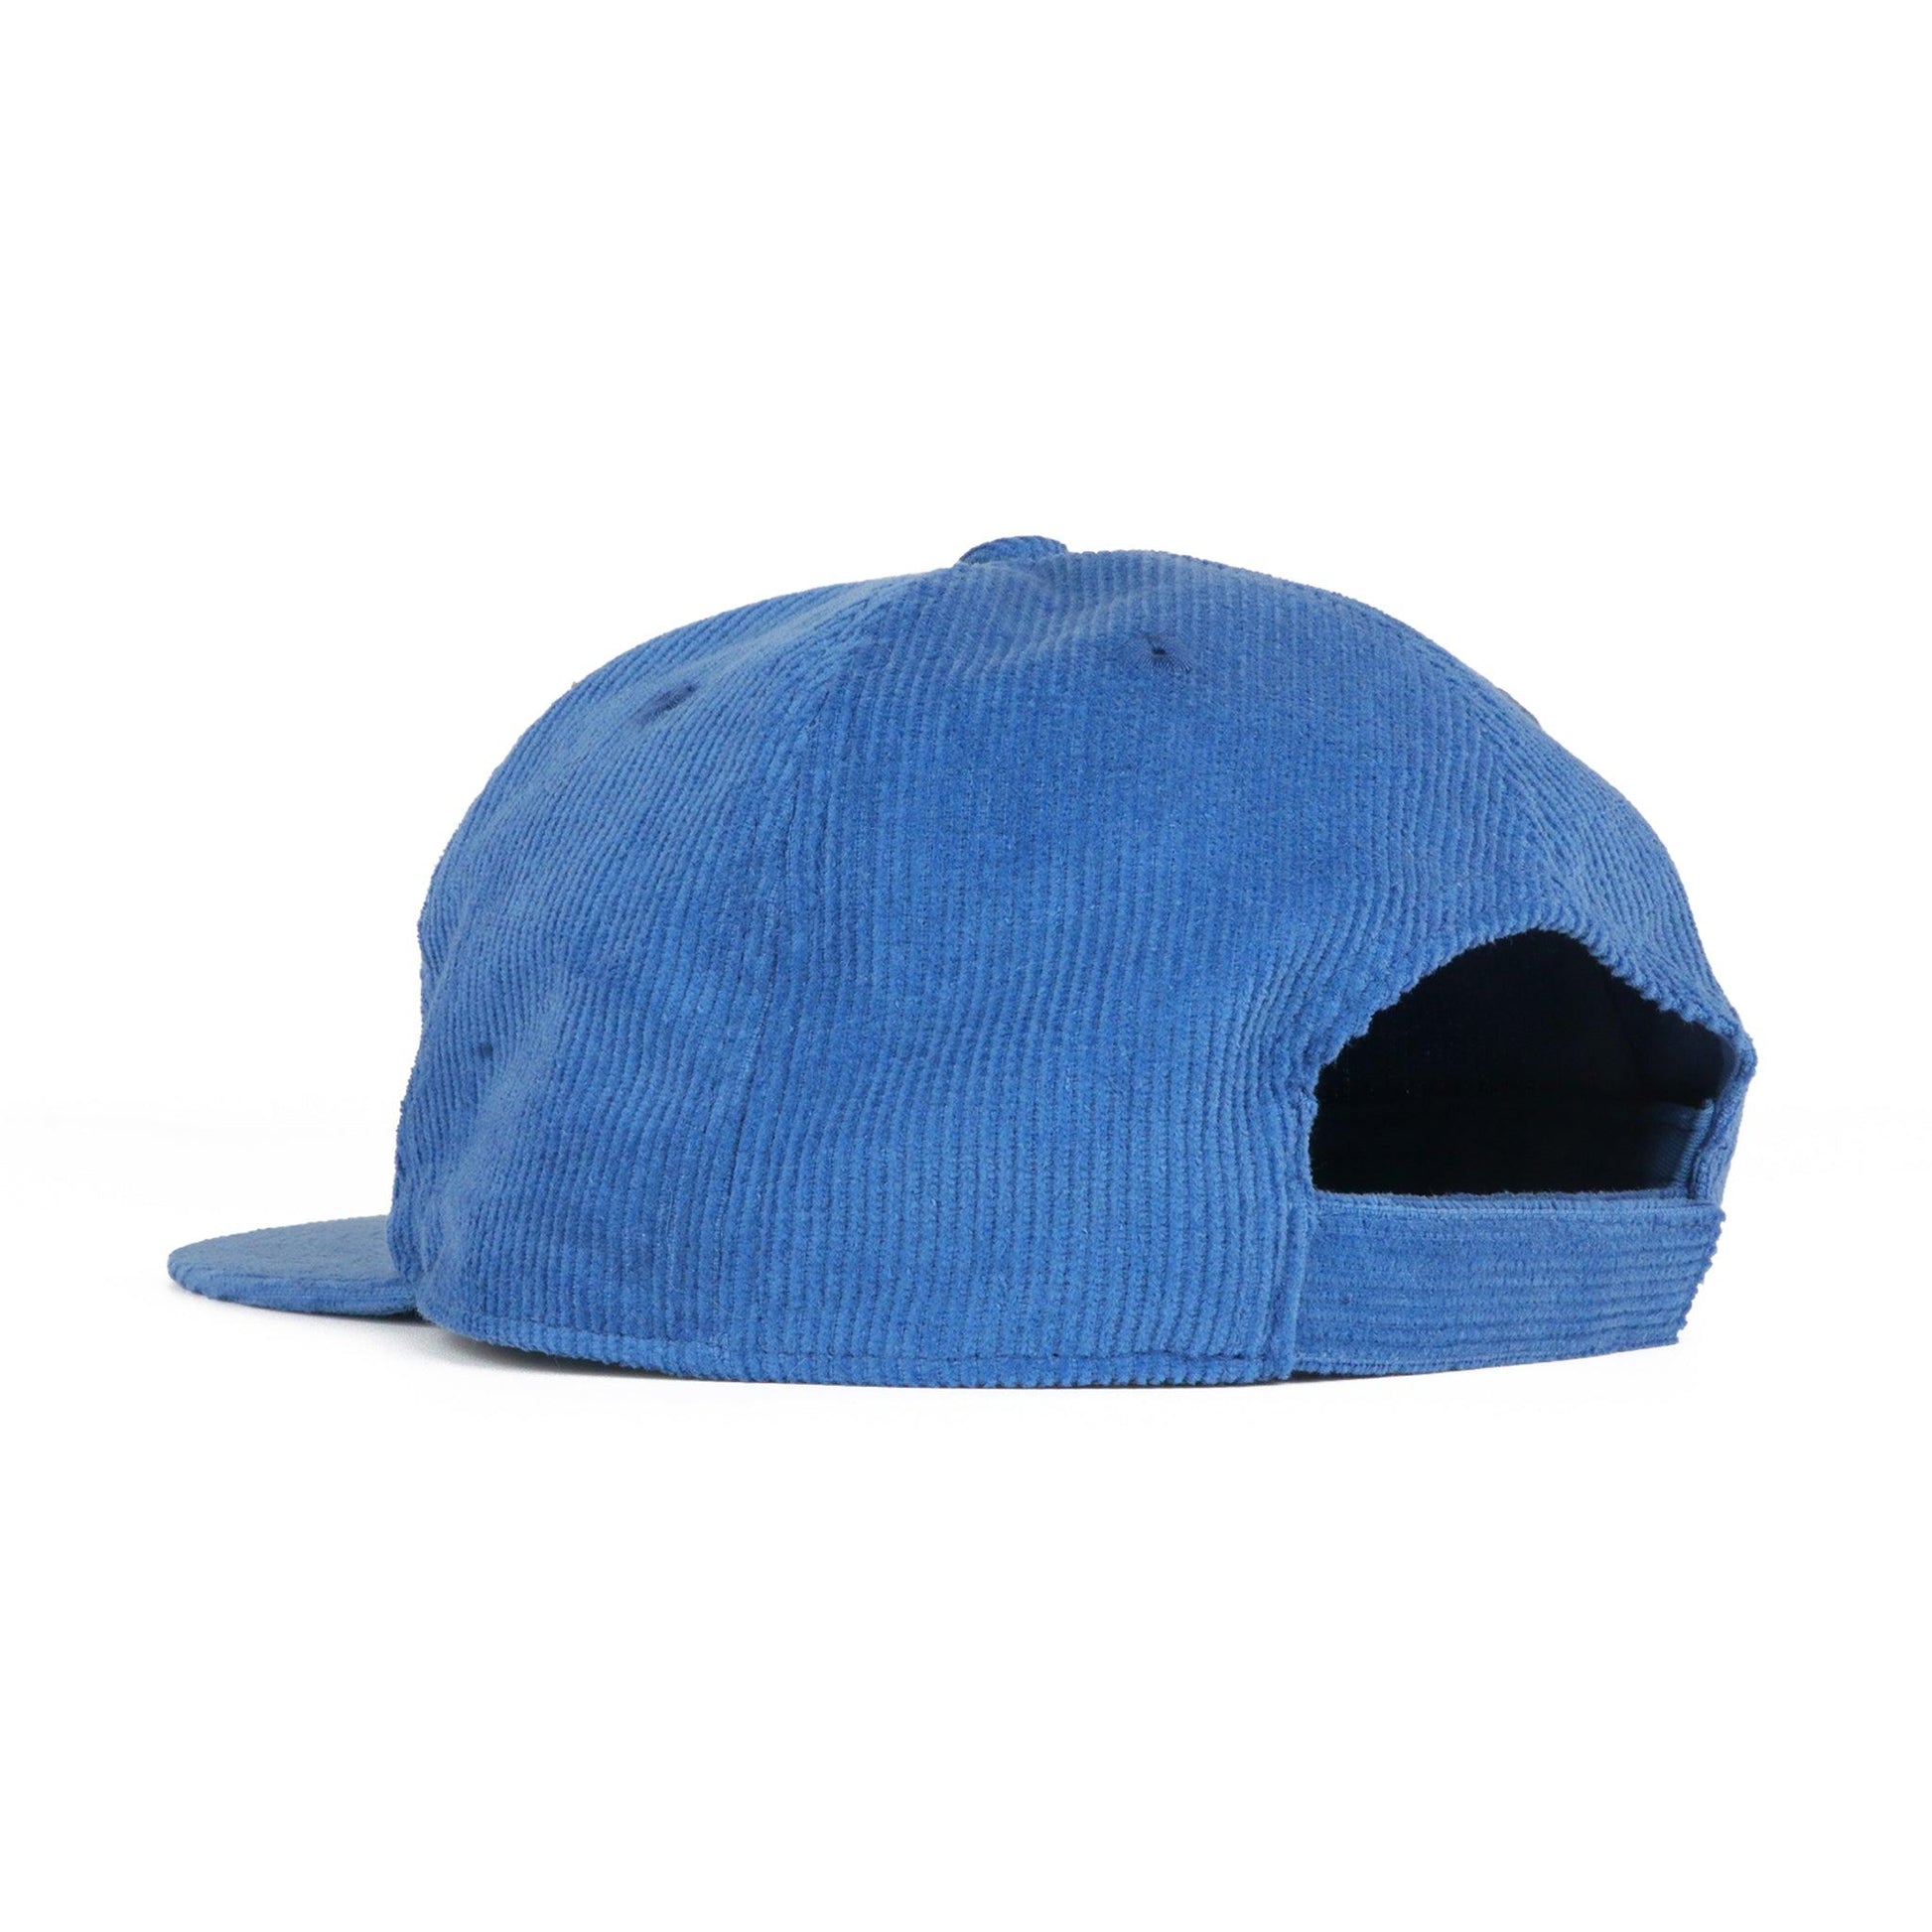 Back of hat with adjustable velcro strap